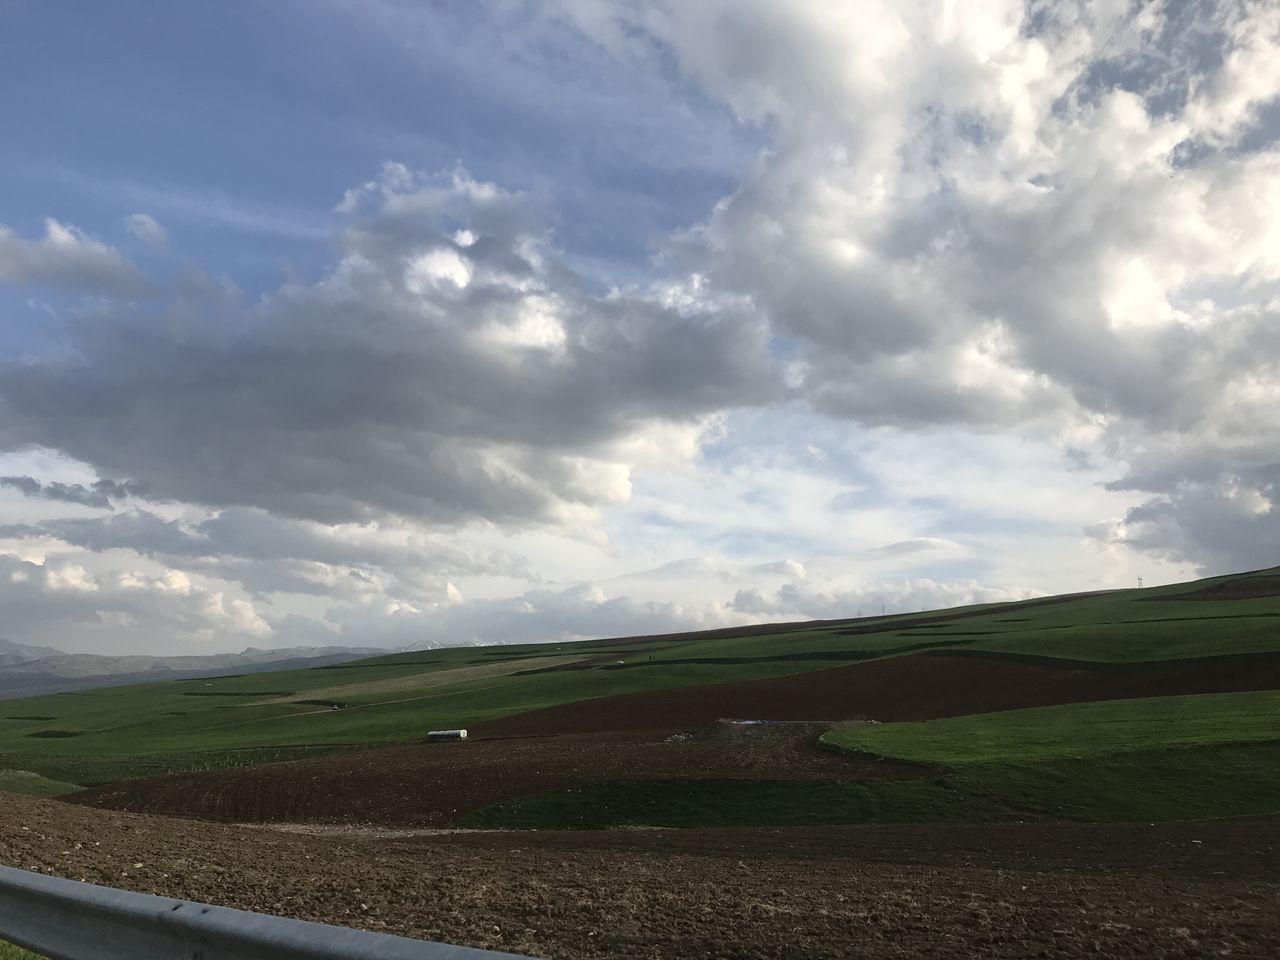 sky, cloud, environment, horizon, landscape, field, nature, plain, hill, land, scenics - nature, road, beauty in nature, grass, rural area, grassland, no people, plant, tranquility, rural scene, transportation, prairie, tranquil scene, day, green, non-urban scene, outdoors, cloudscape, travel, agriculture, horizon over land, sunlight